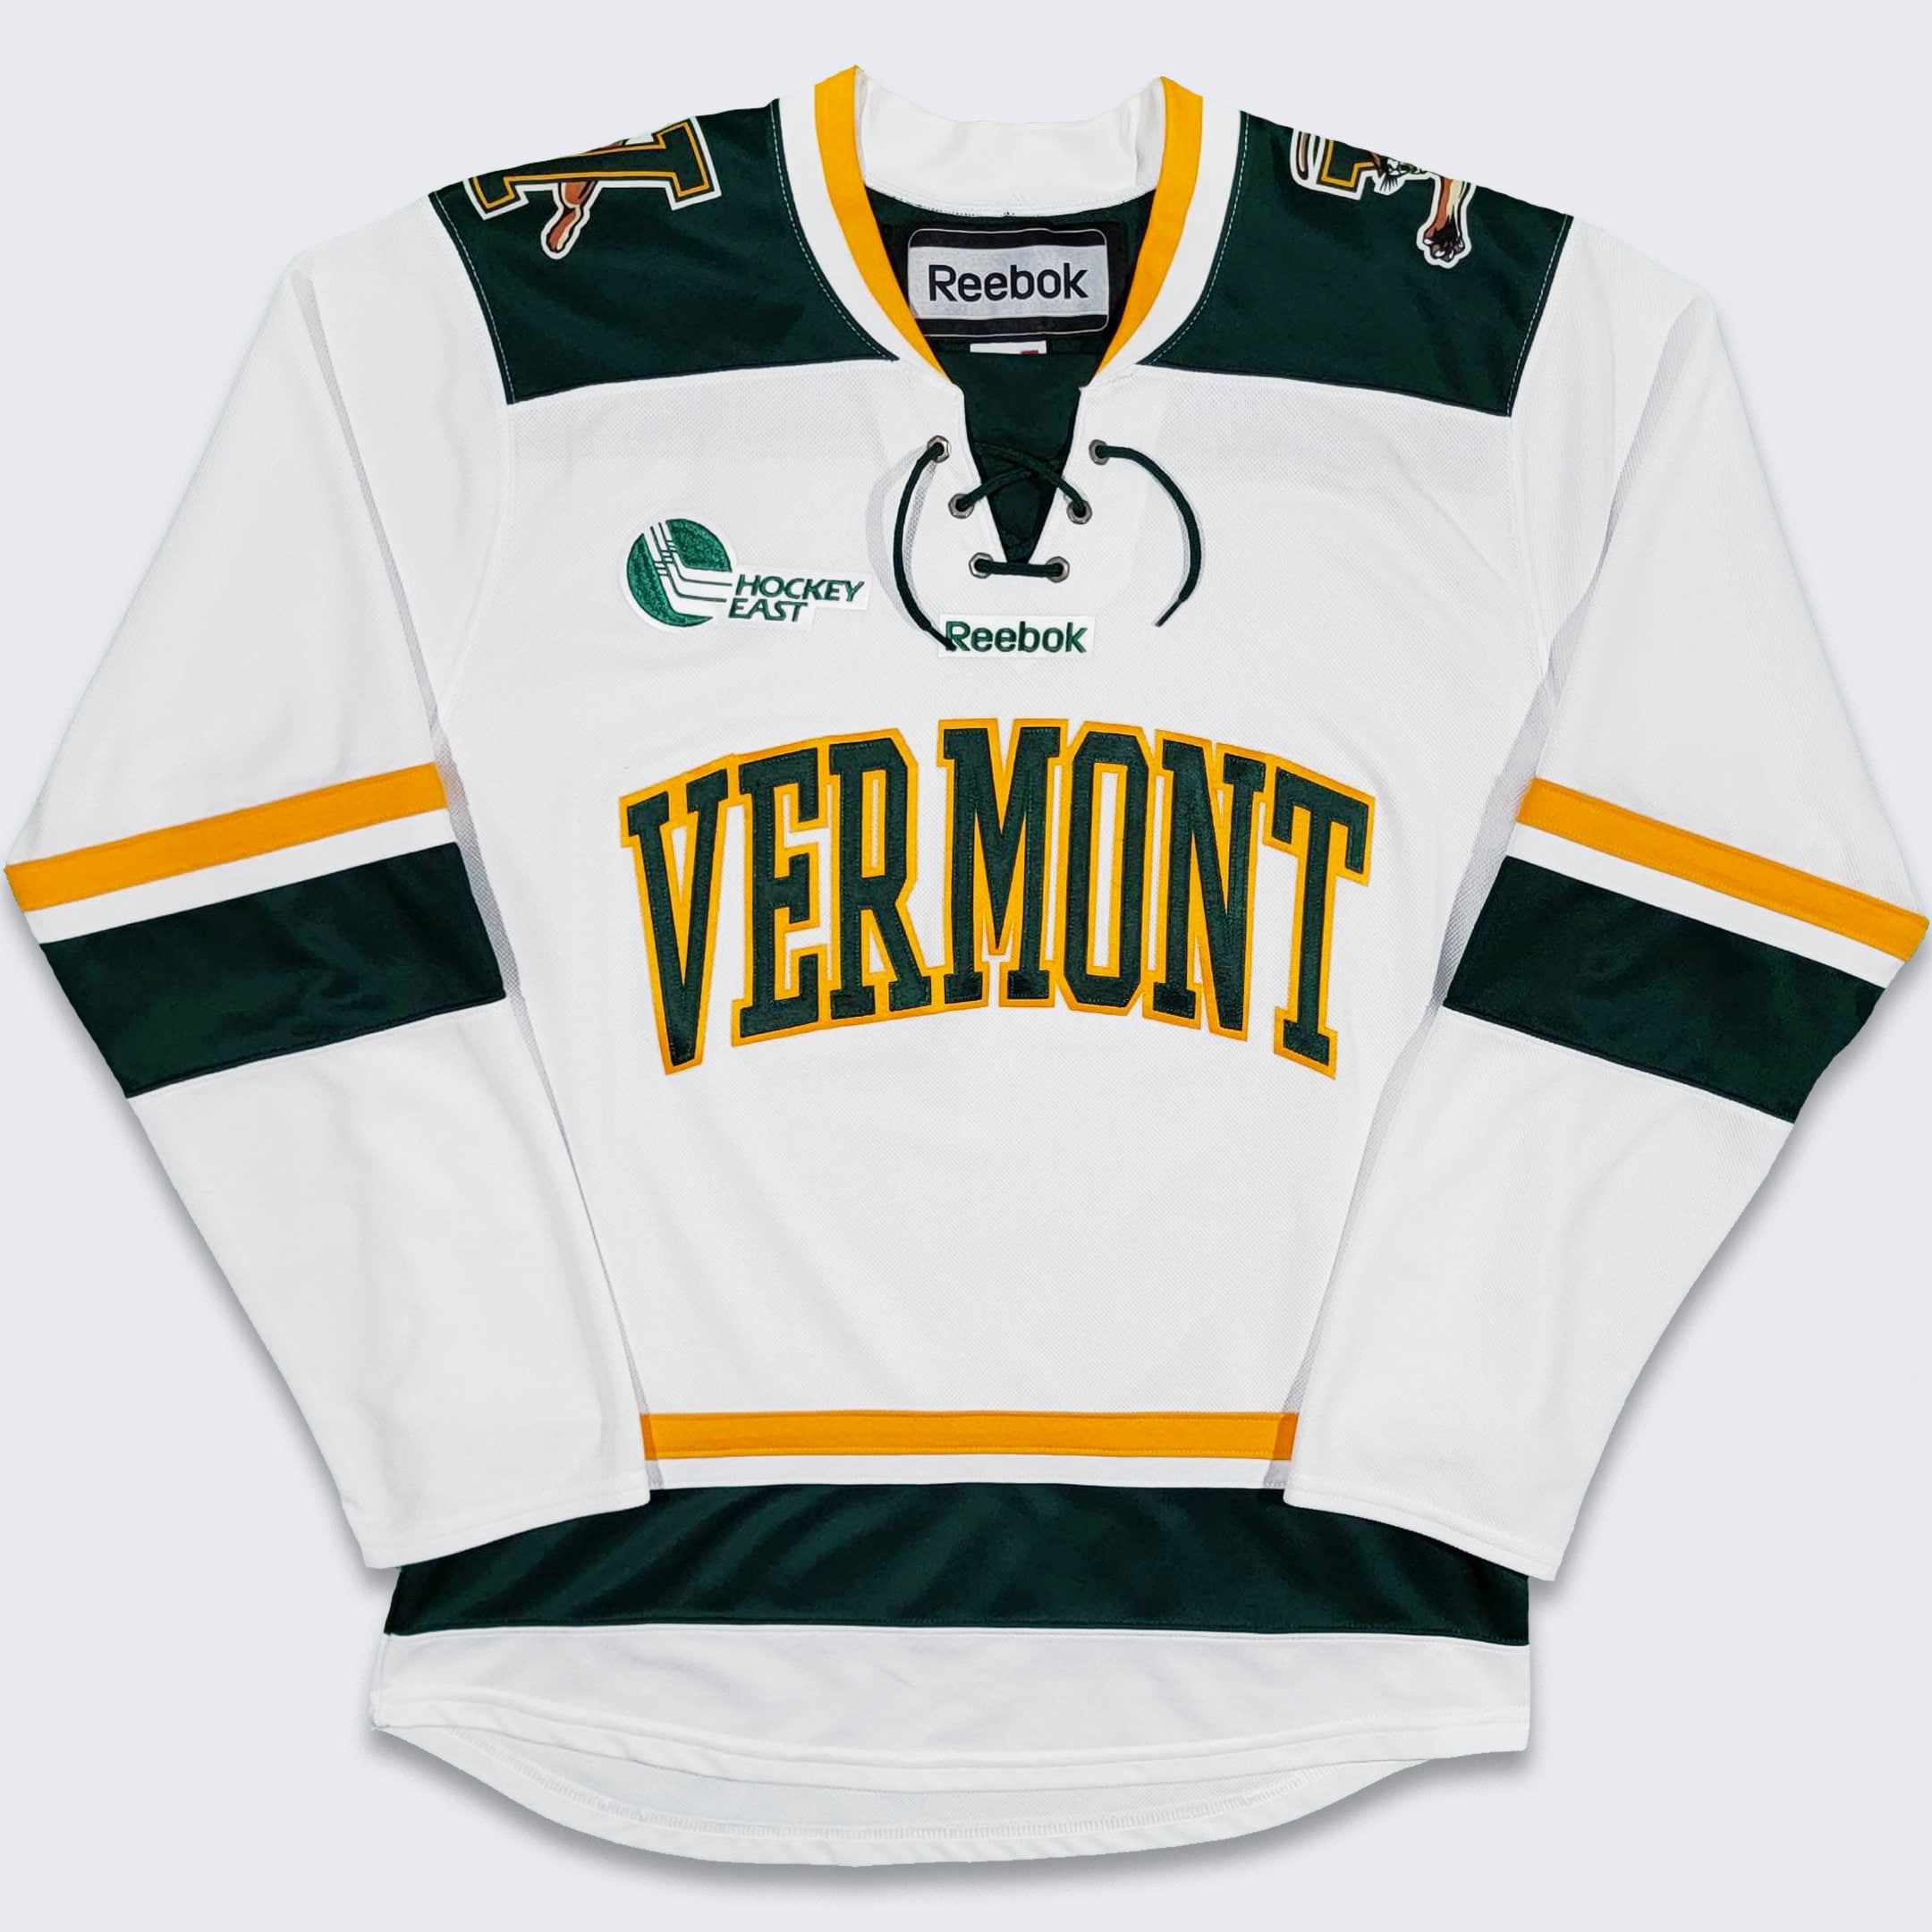 Will jerseys for sale have ads on them? : r/hockey